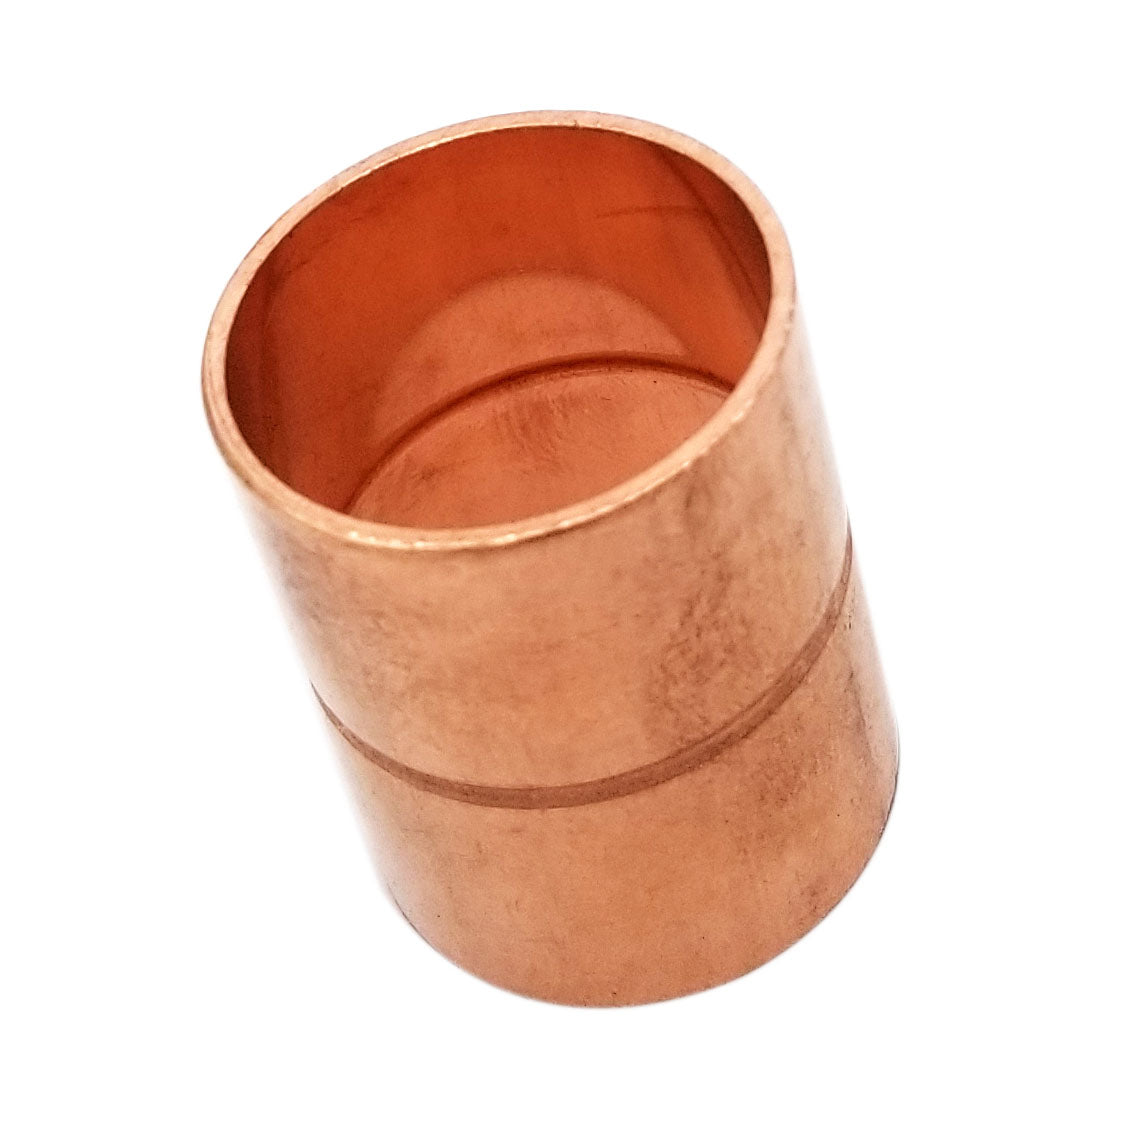 Copper Fitting 3/8 Inch (HVAC Outer Dimension) 1/4 Inch (Plumbing Inner Dimension) - Straight Copper Coupling Fittings With Rolled Tube Stop & HVAC – 99.9% Pure Copper - 10 Pack